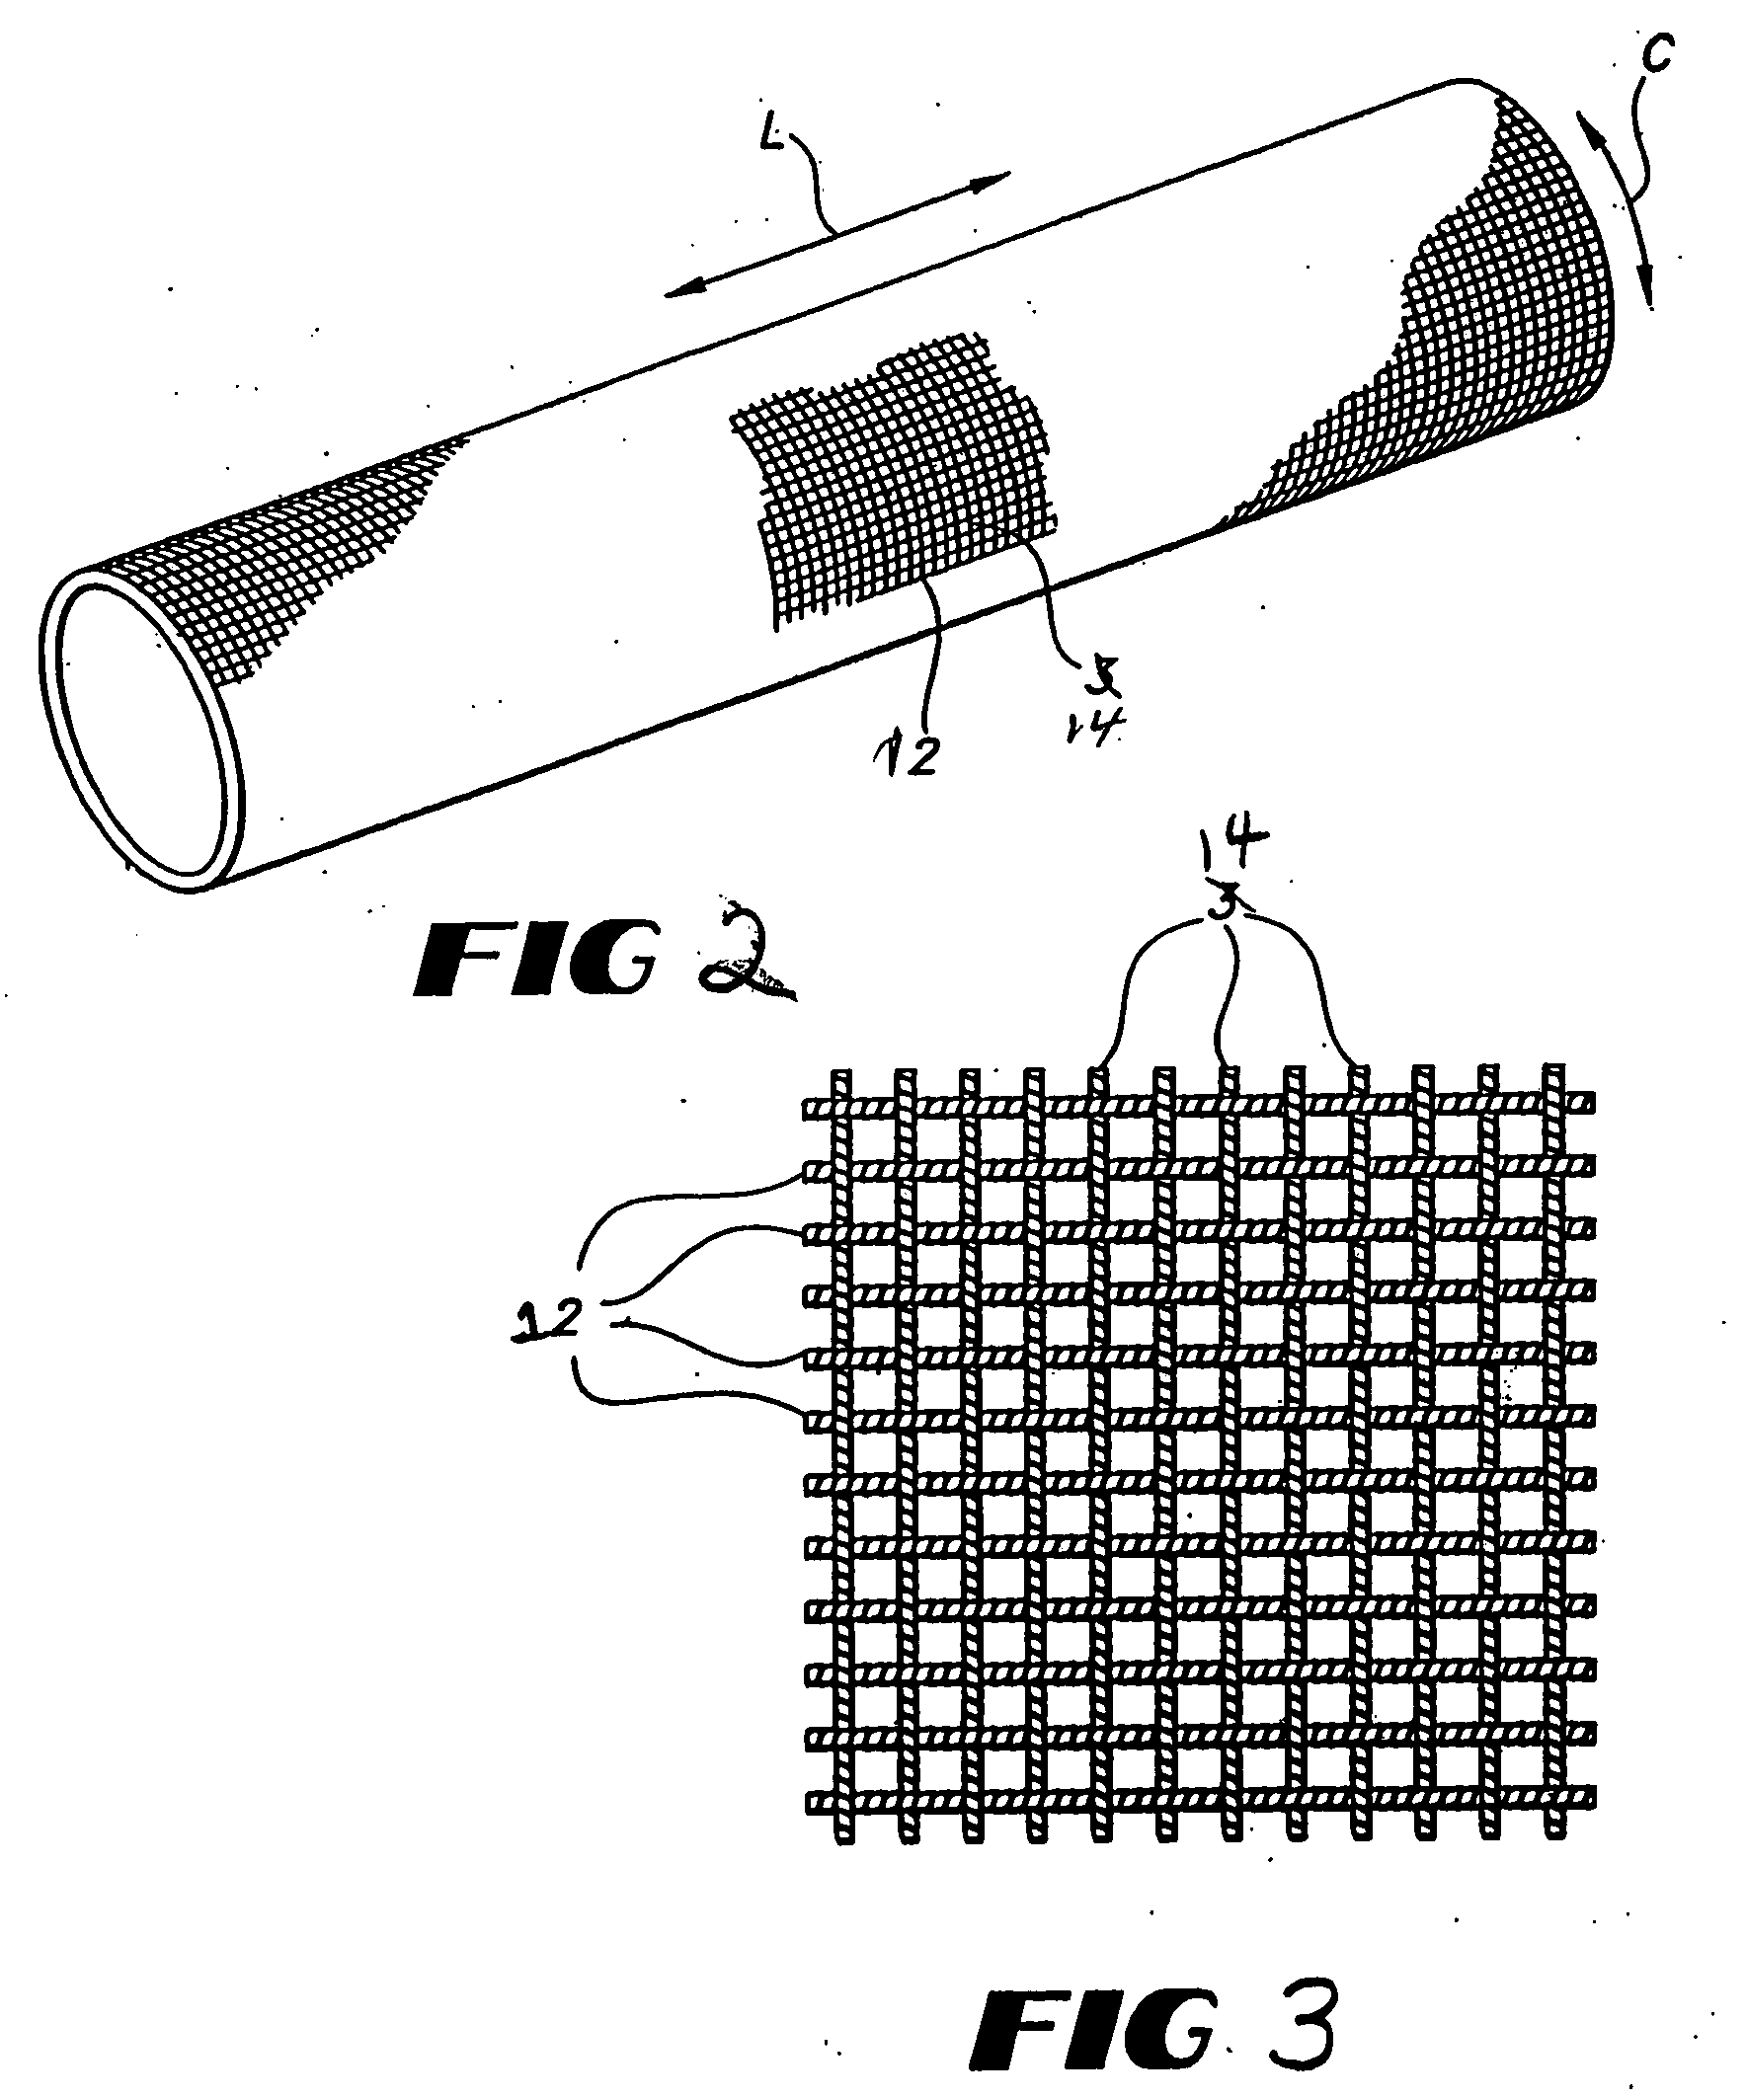 Blood-tight implantable textile material and method of making